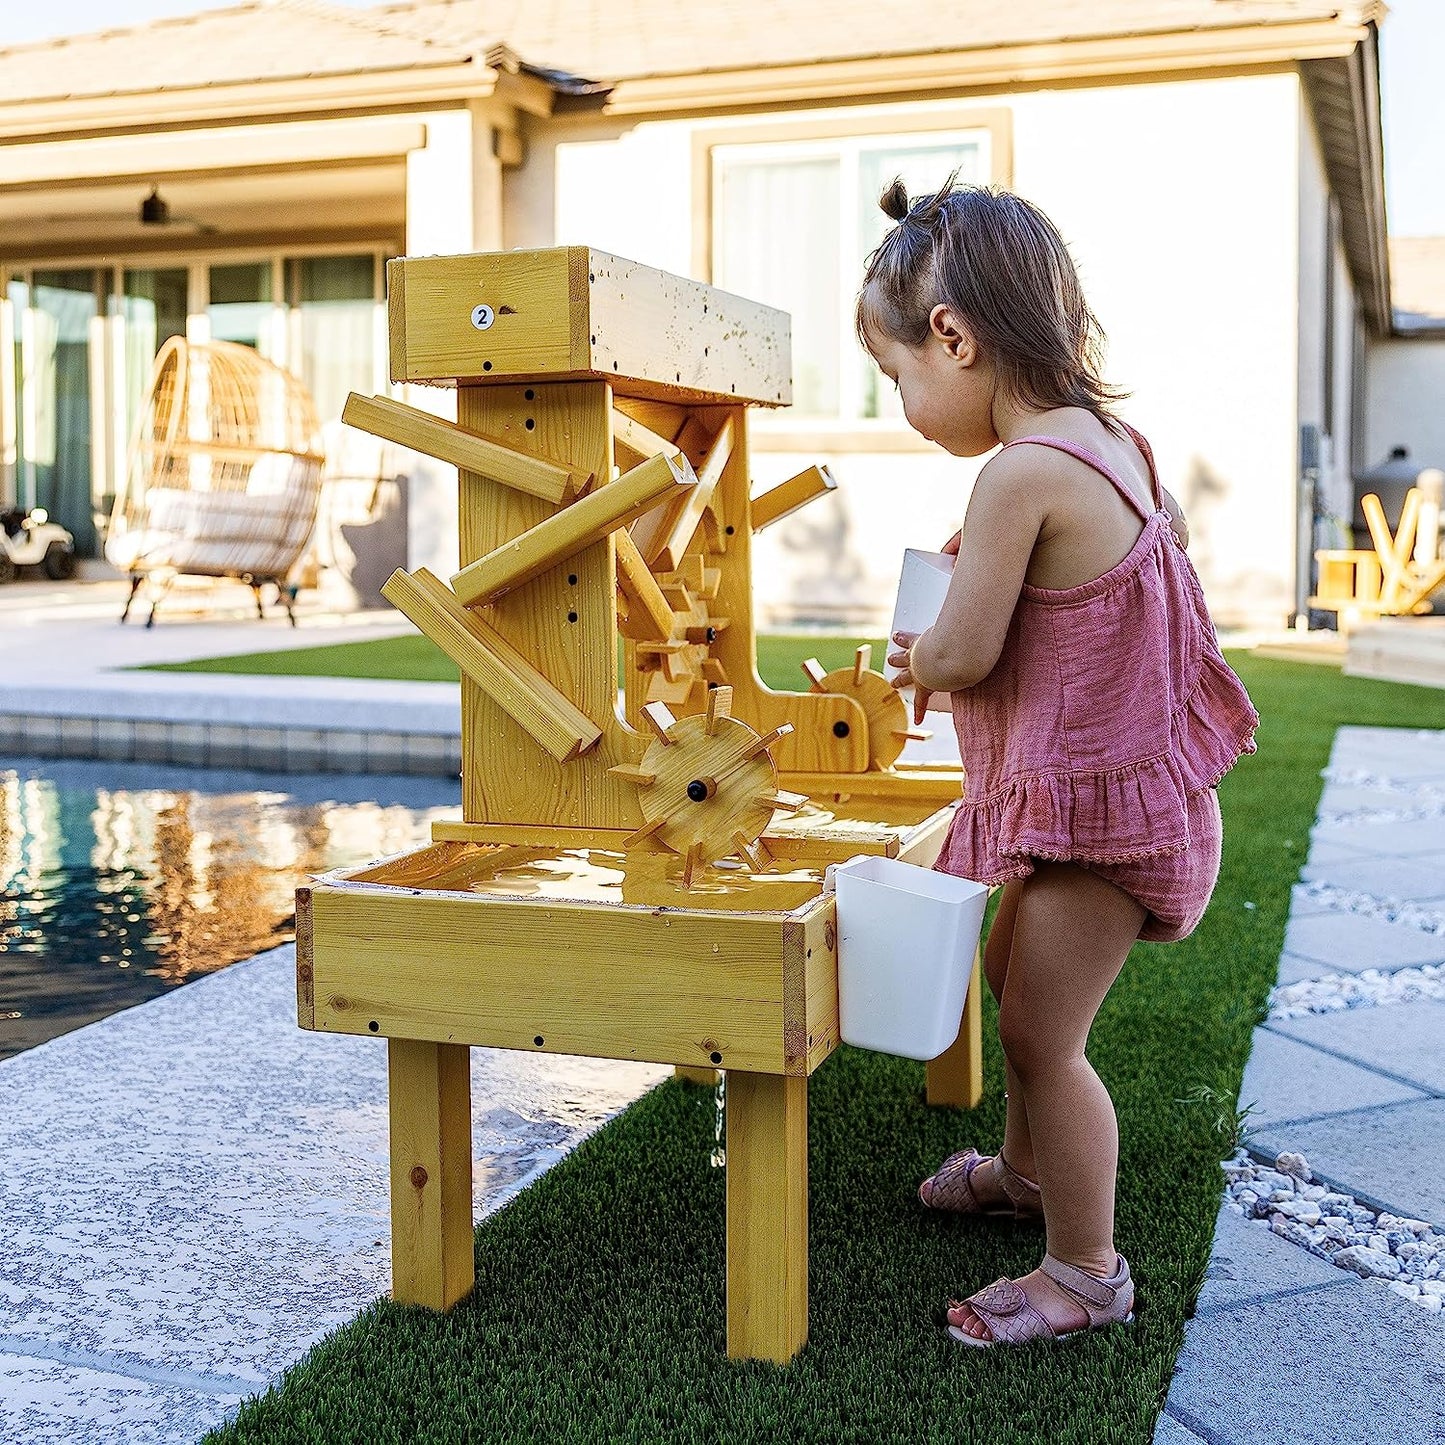 Outdoor Wooden Water Table For Kids, Toddlers by Avenlur